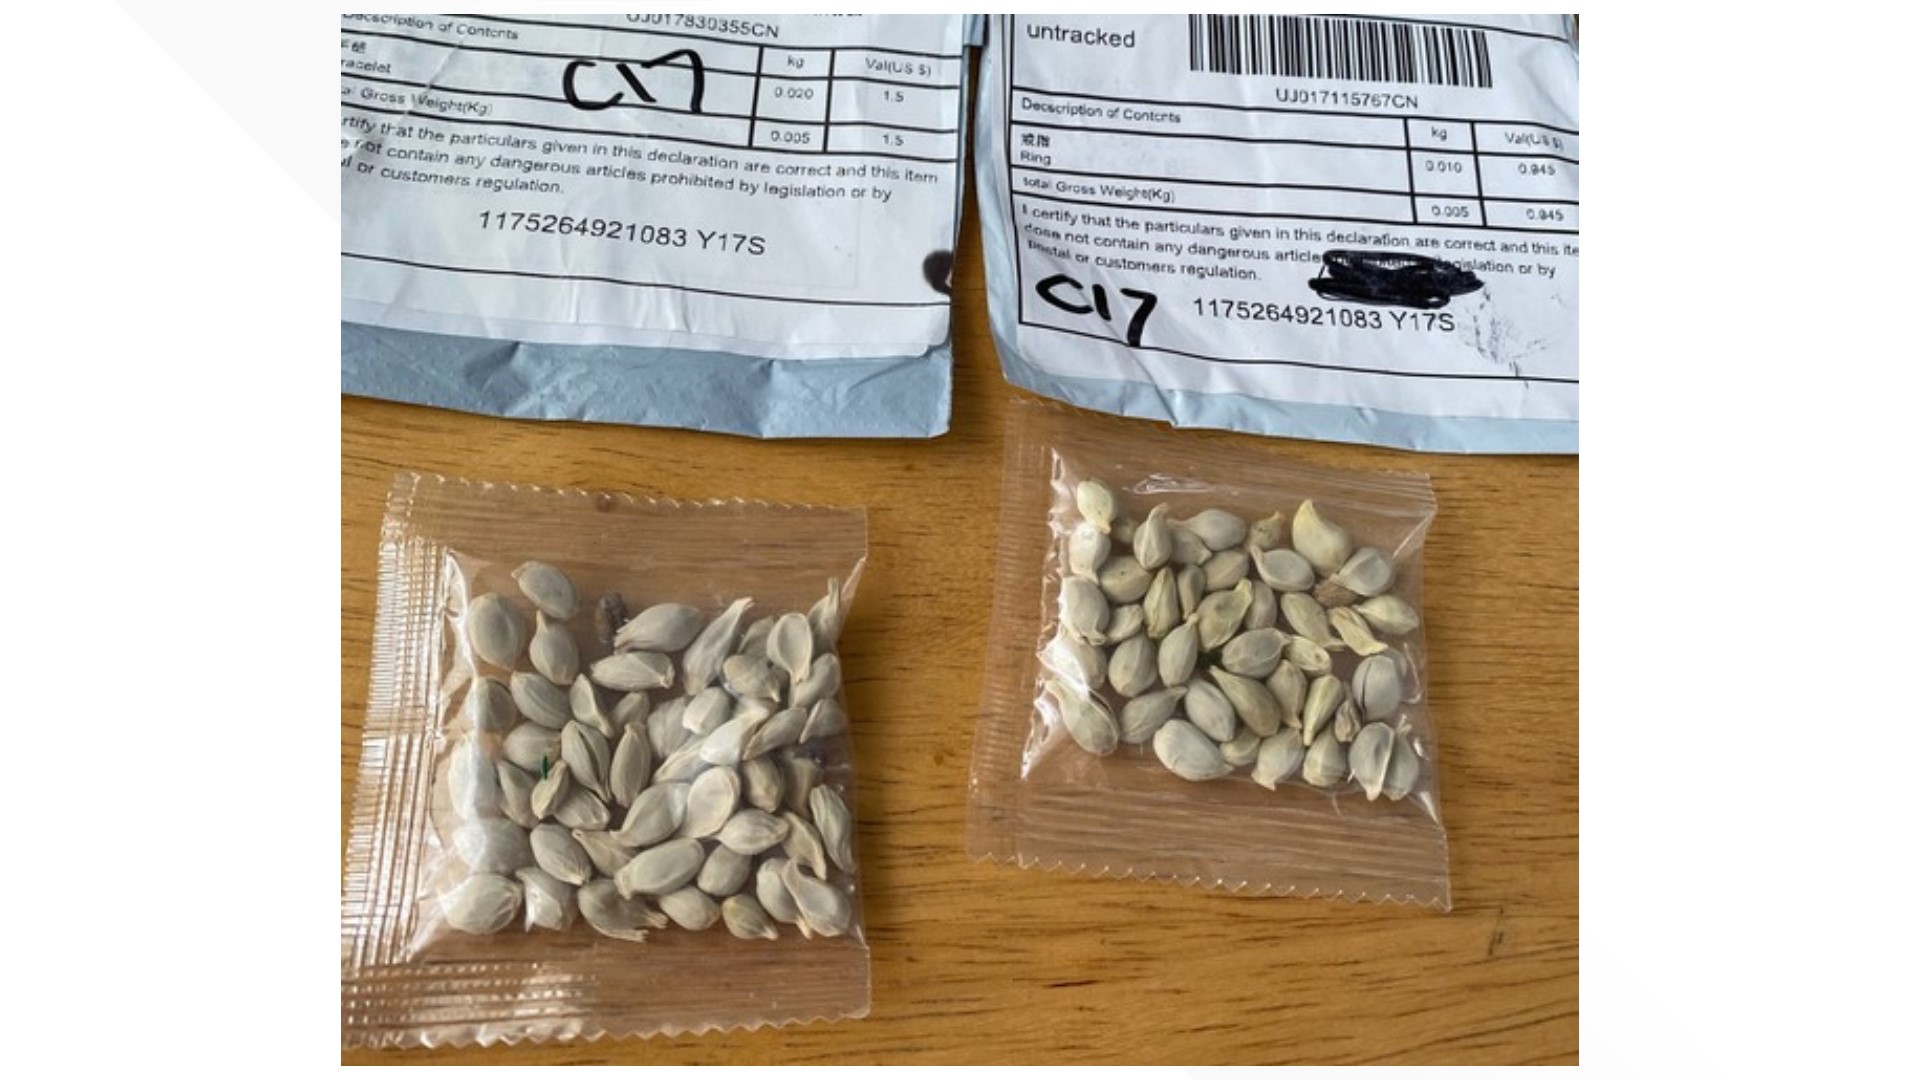 Got a package of seeds from China? Don't open it or plant them, Michigan officials say